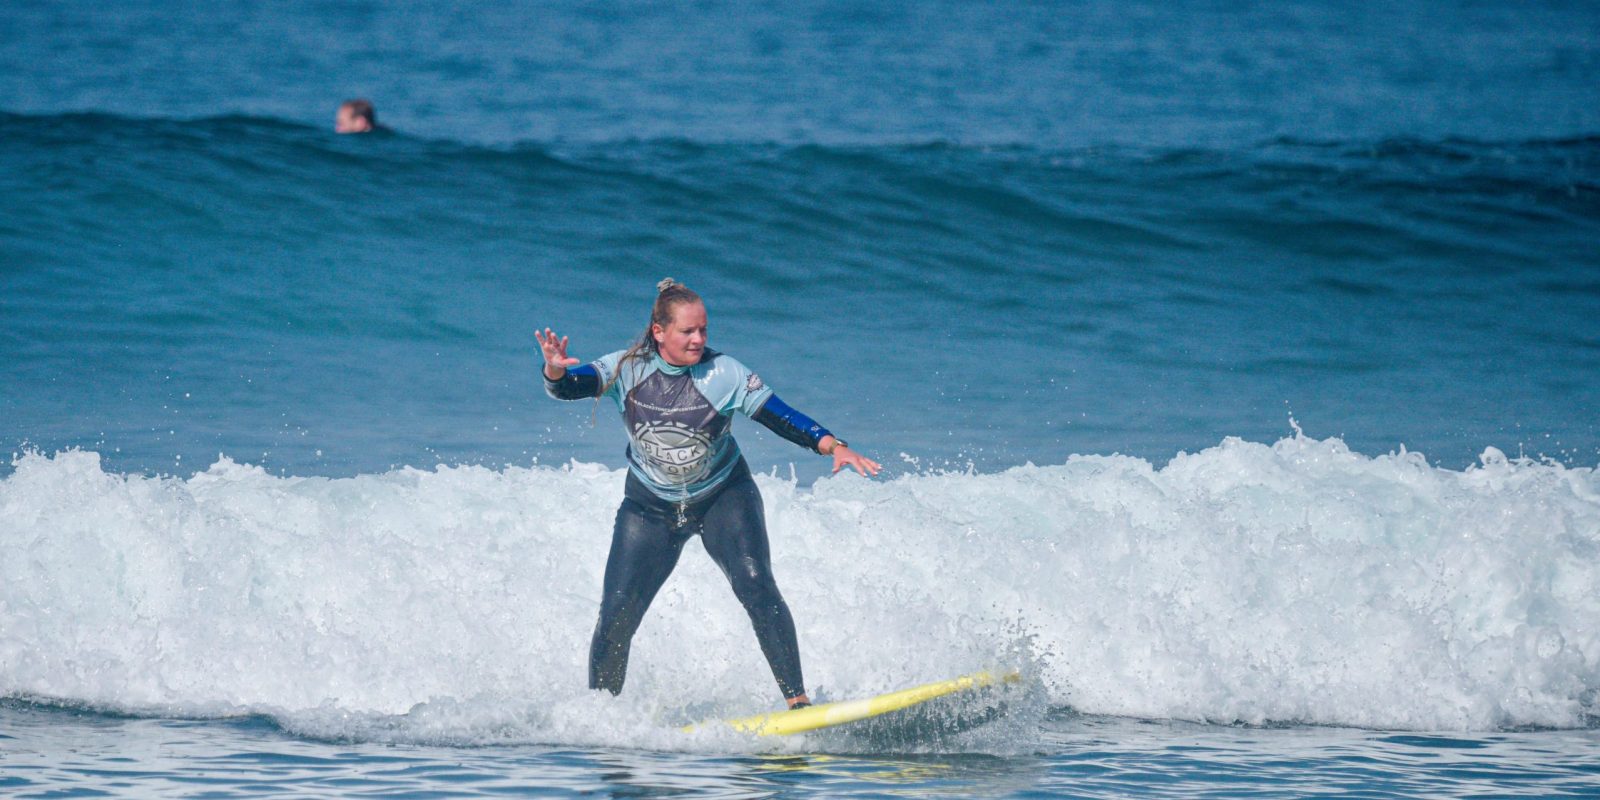 Blackstone Surf Center student surfing in Playa las Américas in Tenerife during a surf lesson